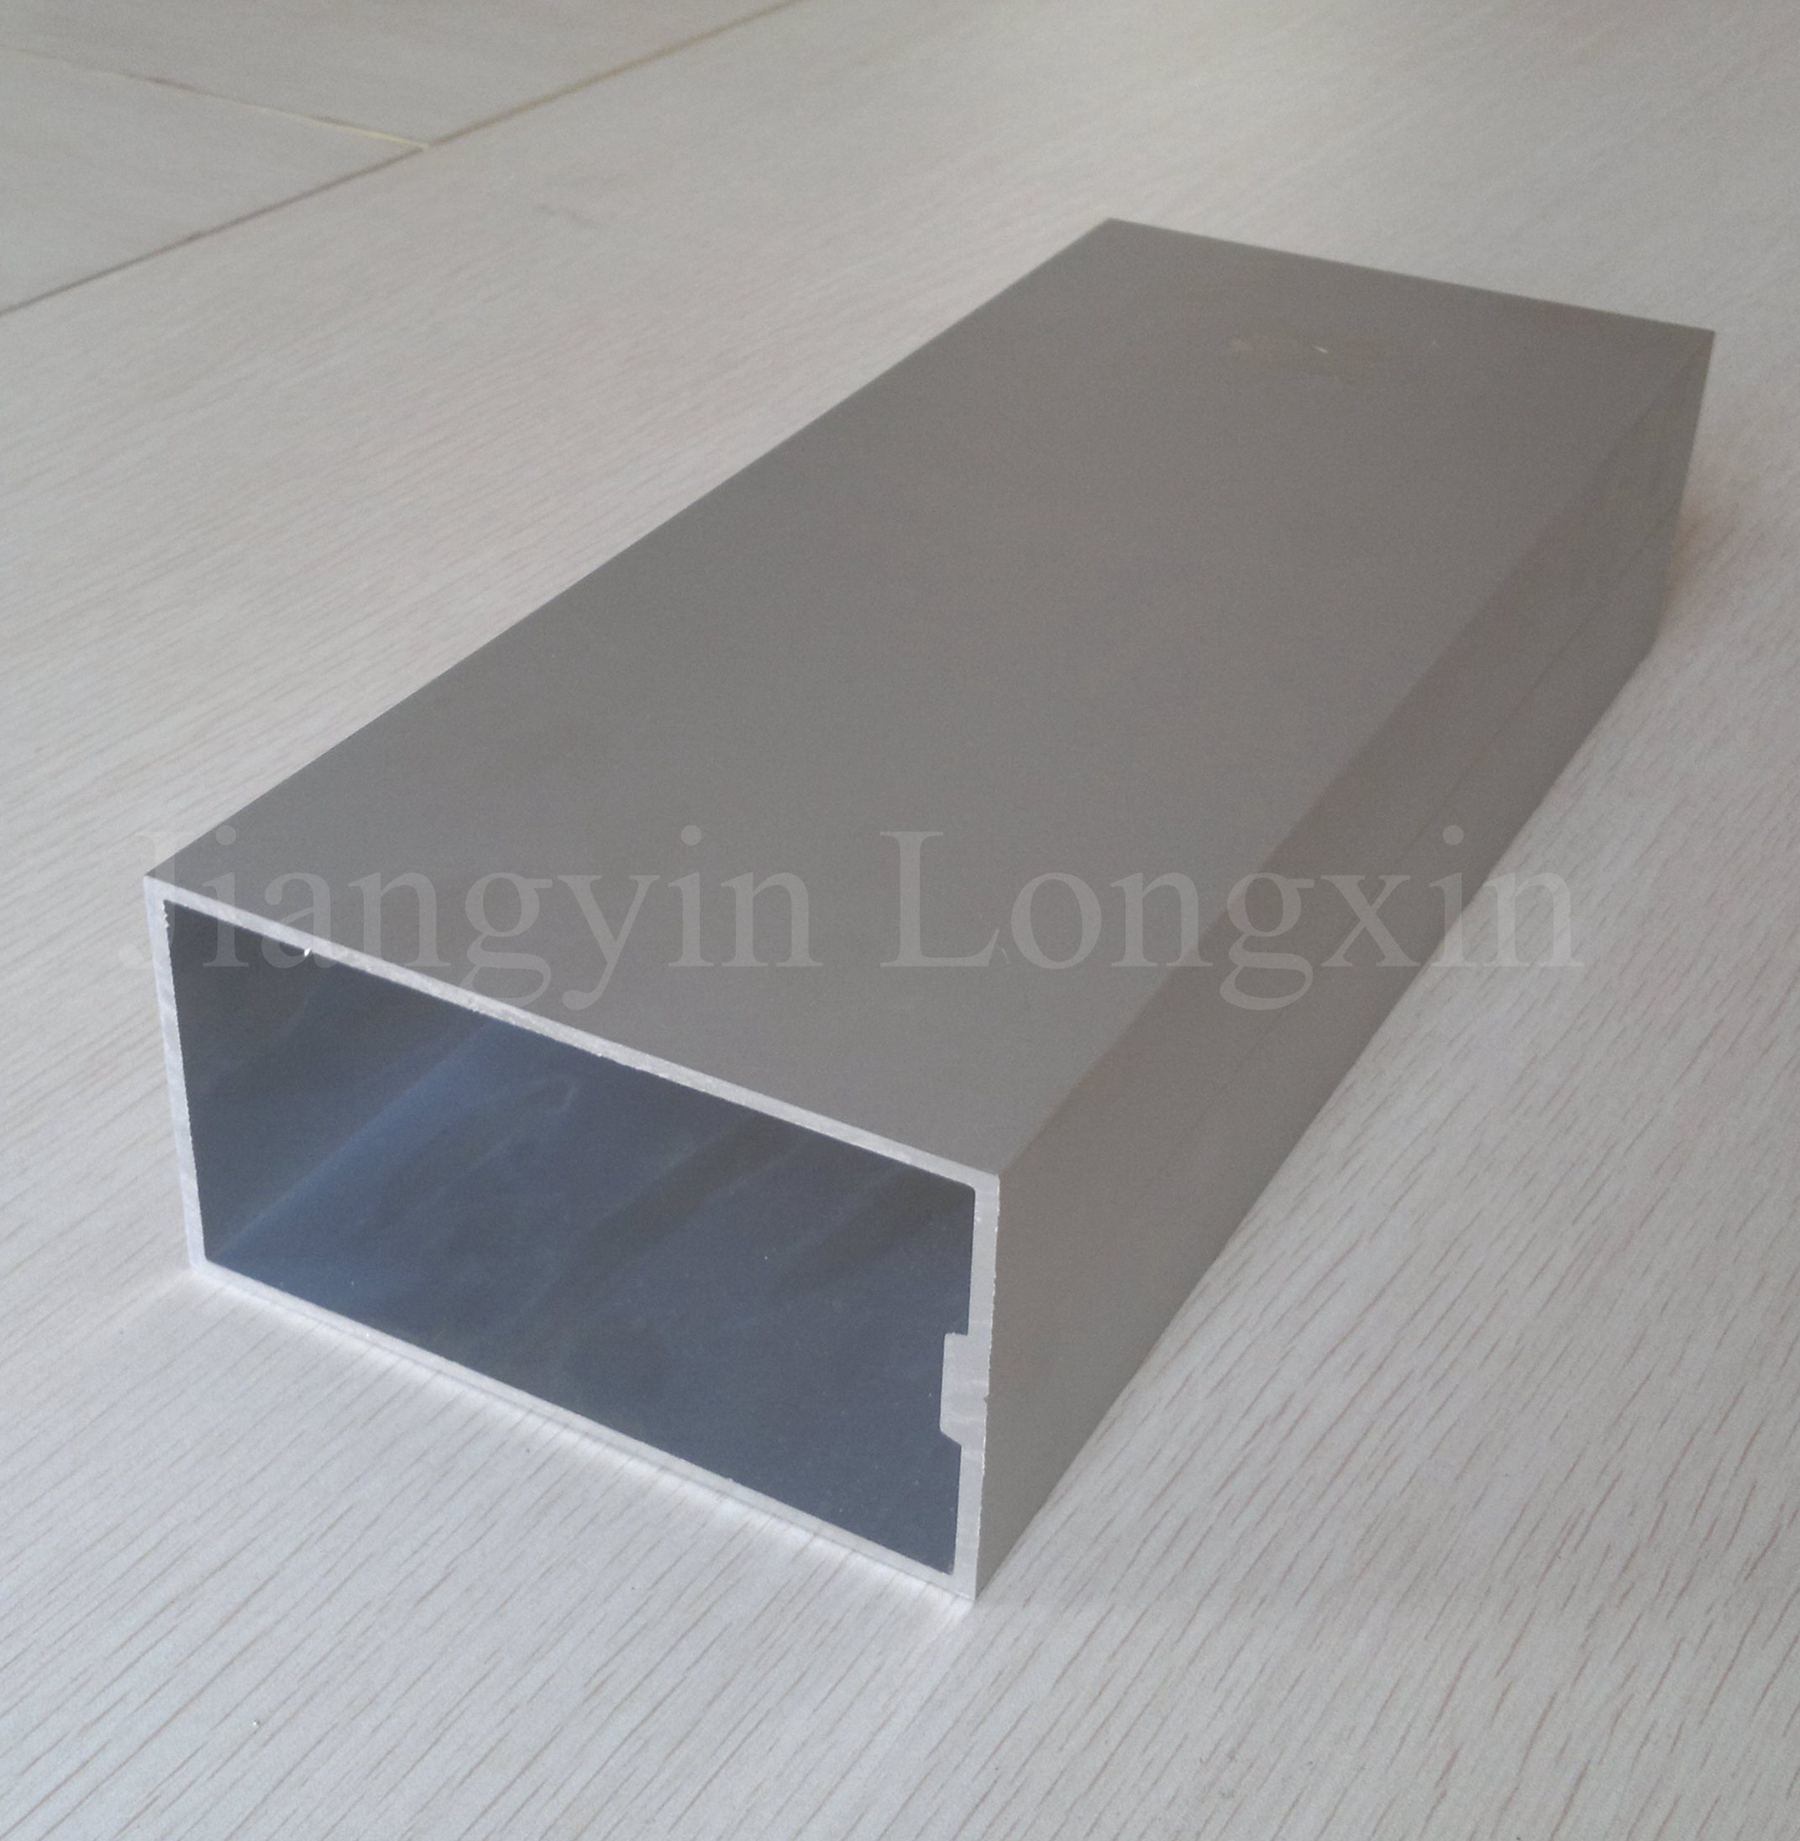 Silver Anodized Aluminum Profile of Curtain Wall